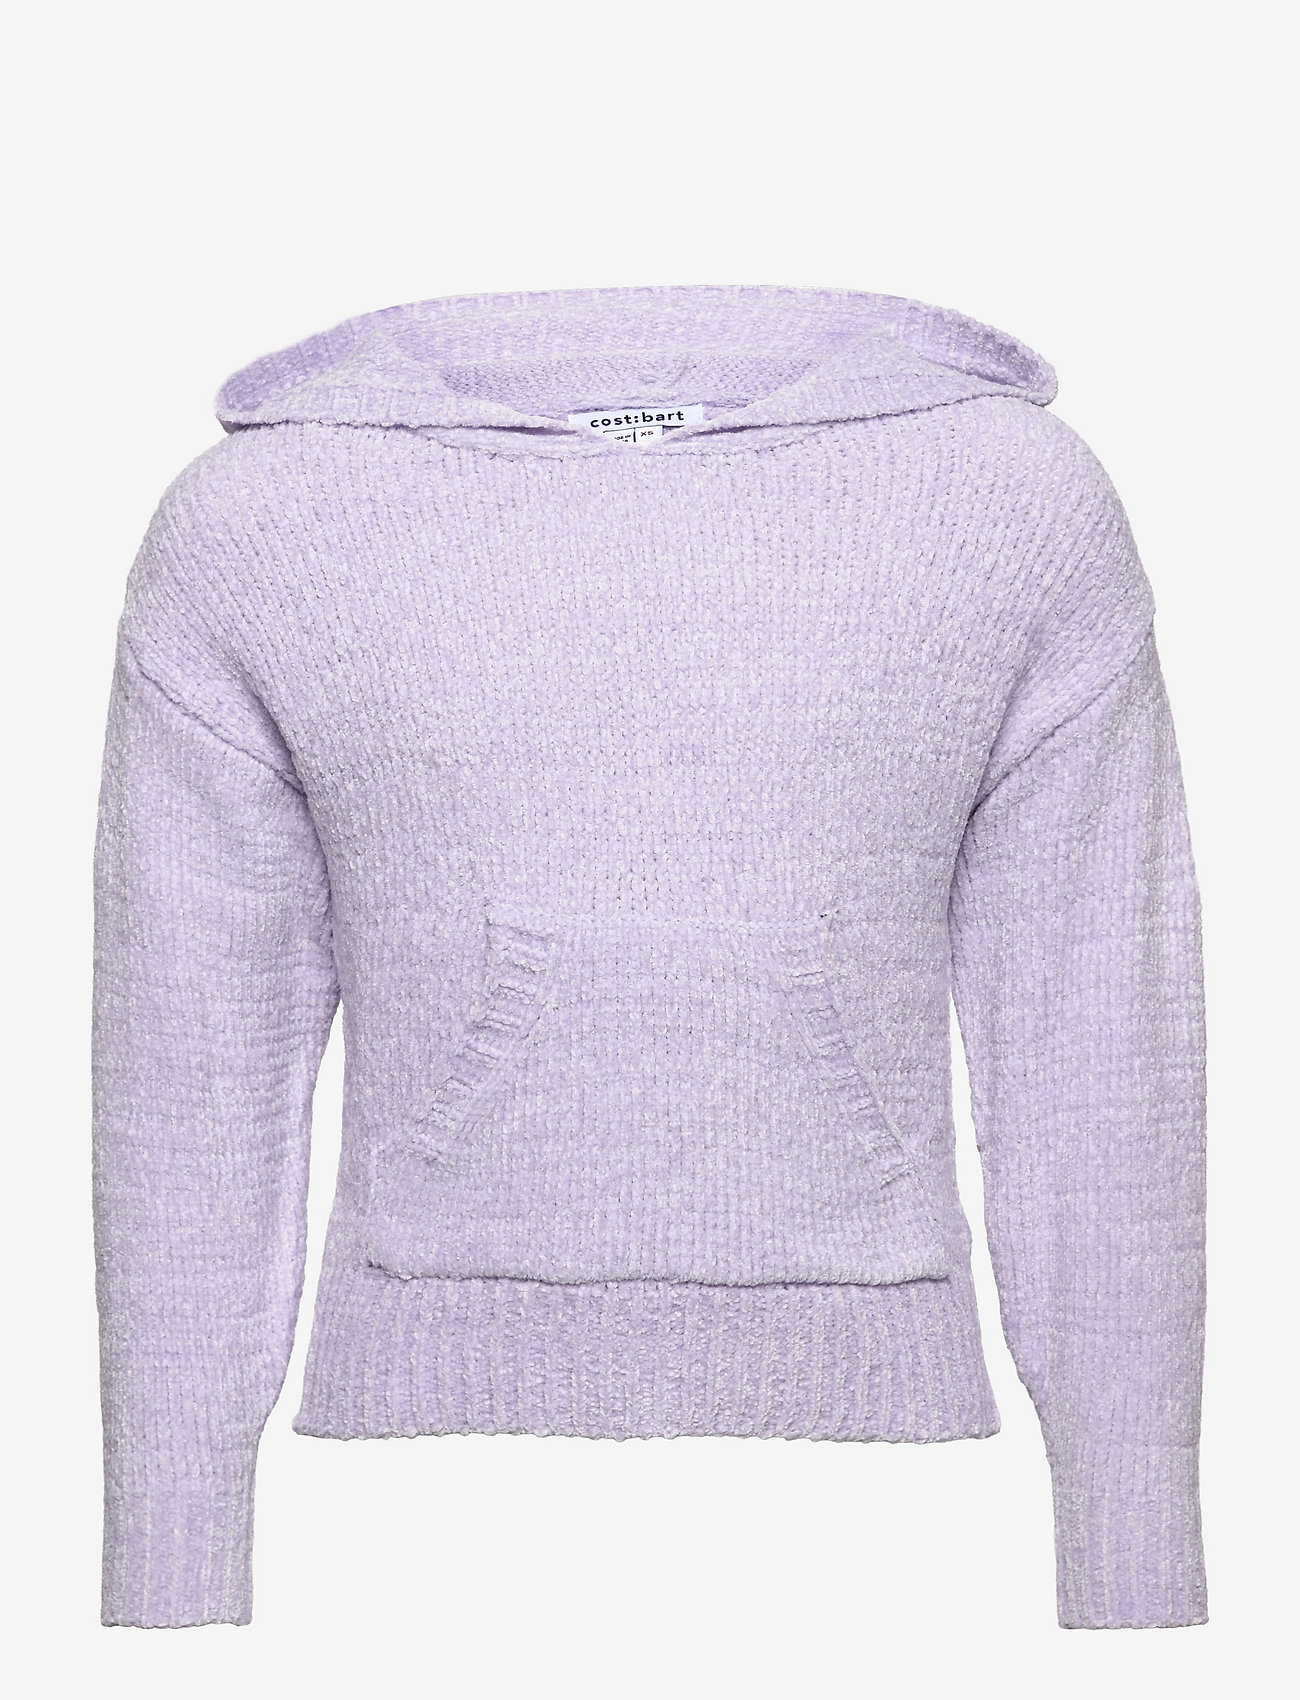 Costbart - CBPoxy Knitted Hoodie - swetry - lavender blue - 0